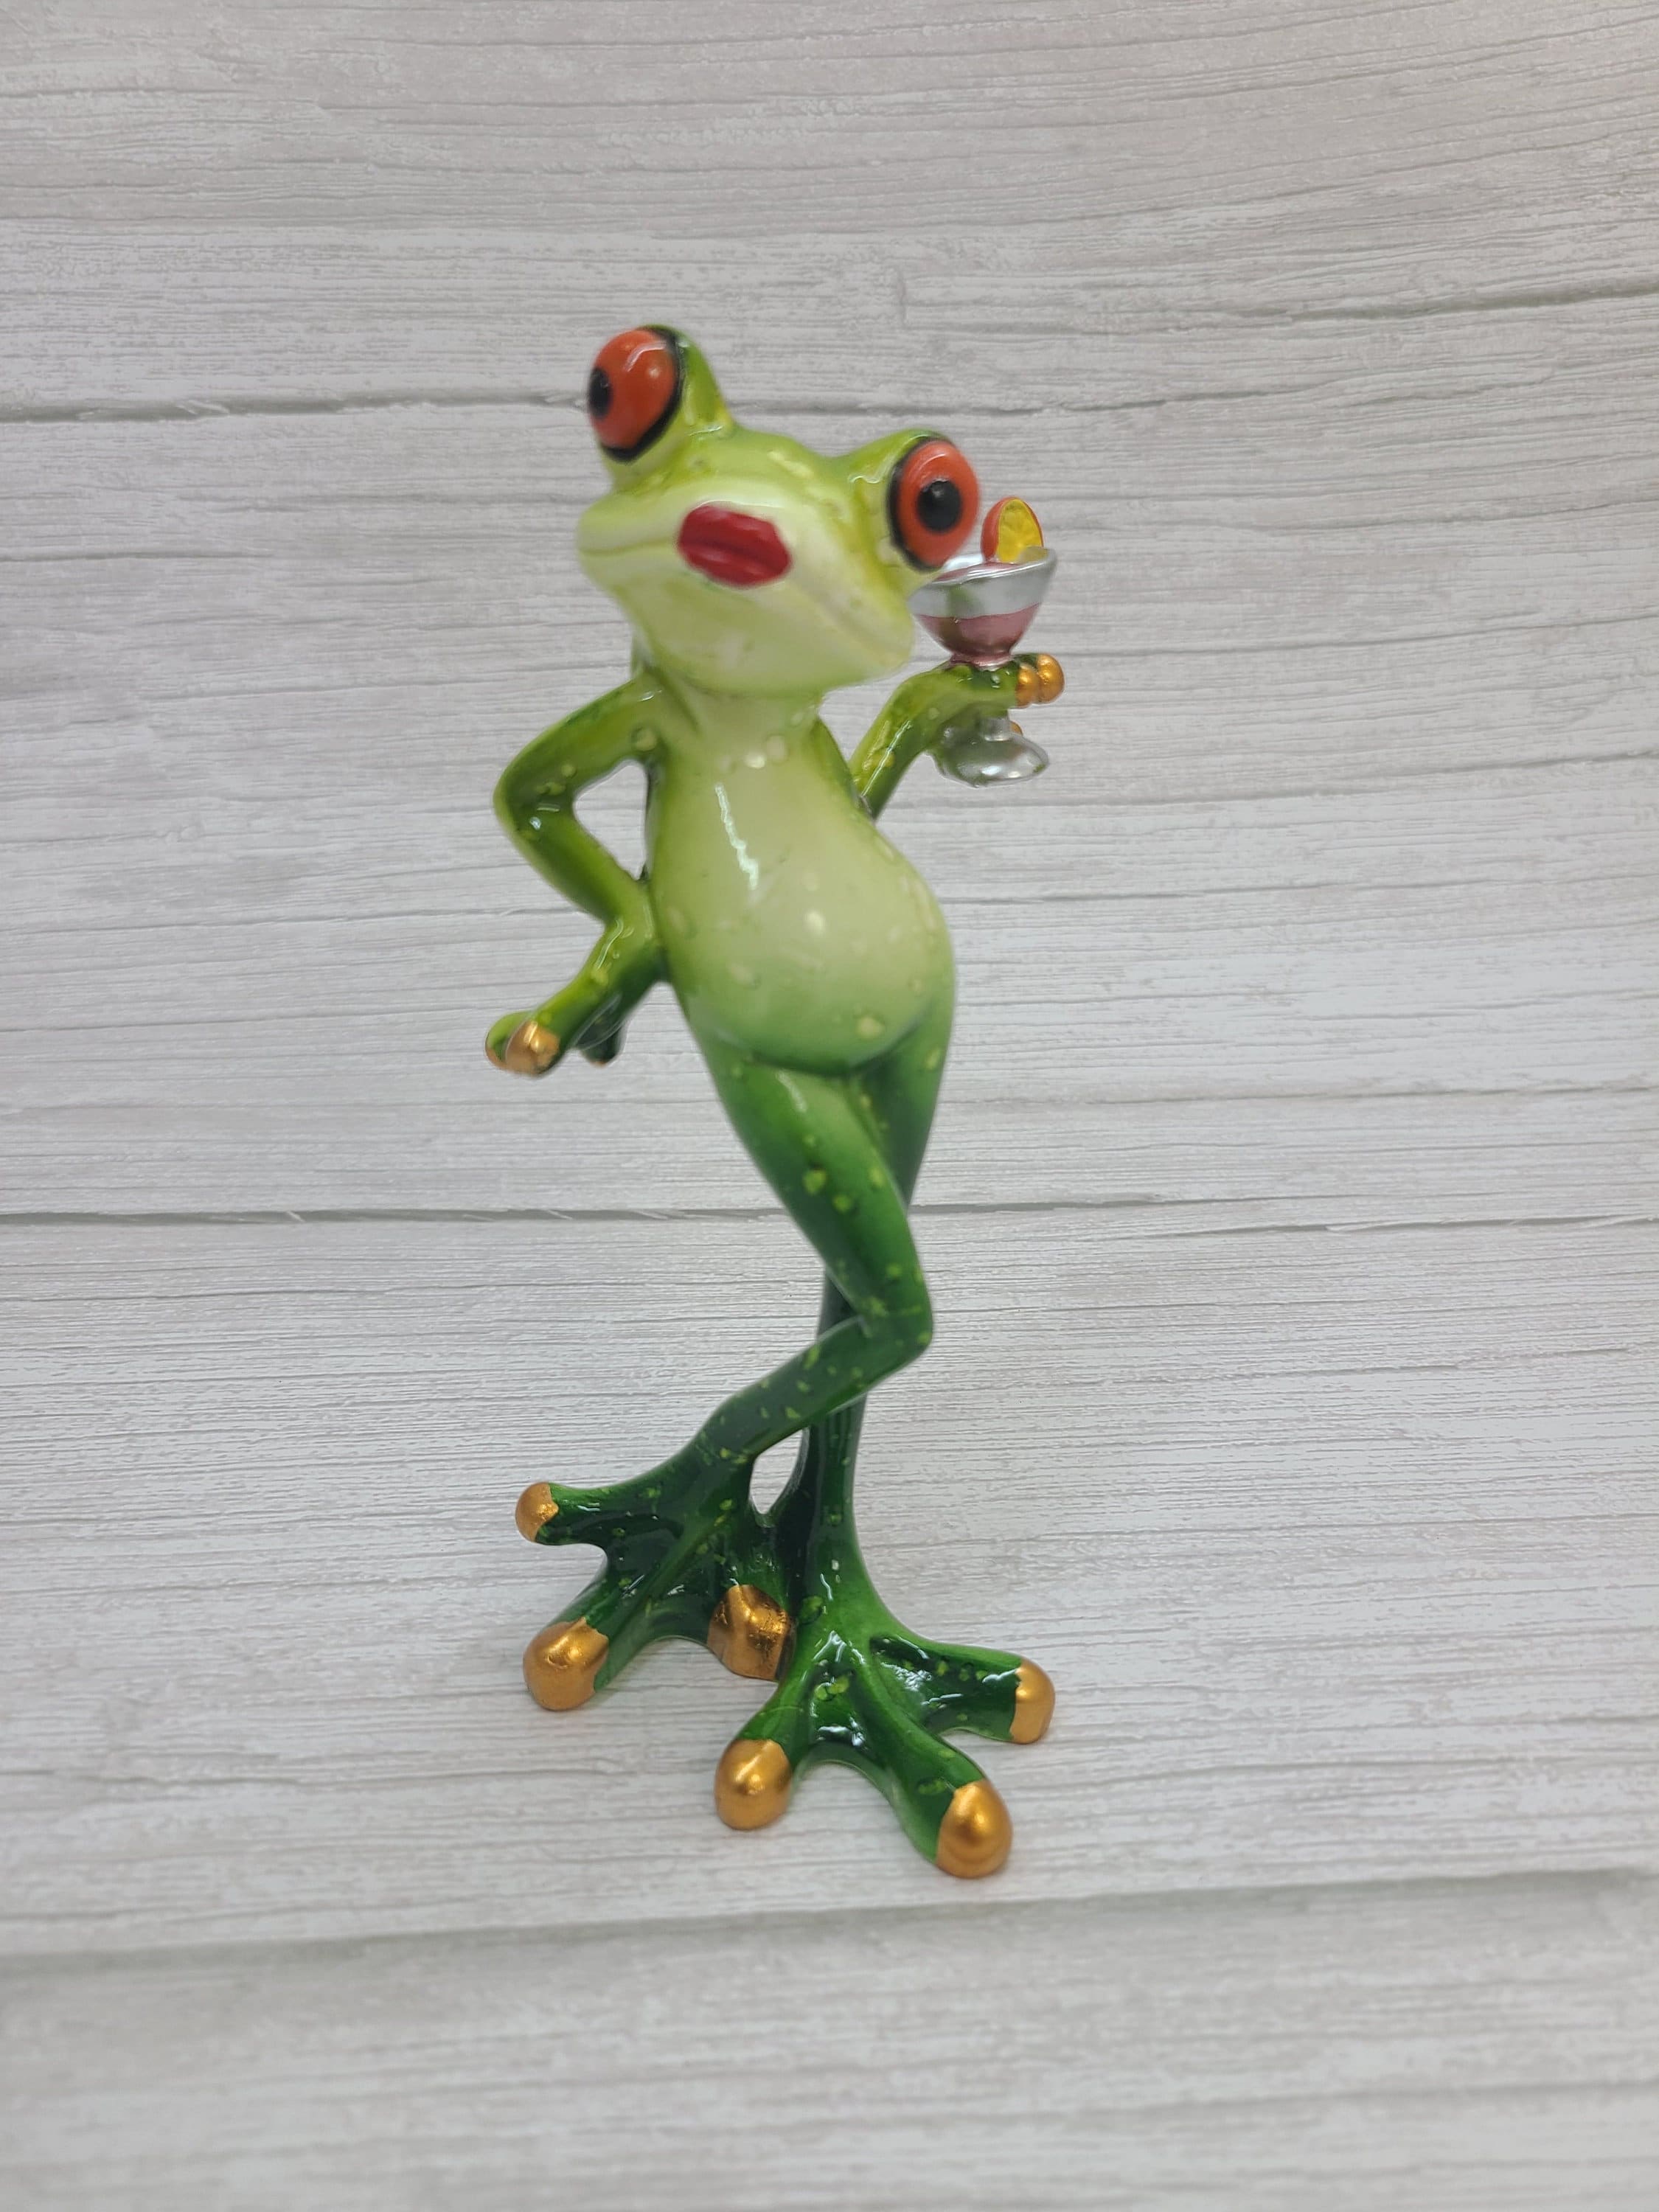 Buy Funny Frog Figurine, Lady Frog Figurine, Lady Frog Drinking Martini,  Funny Office Decor, Frog Figure Online in India 